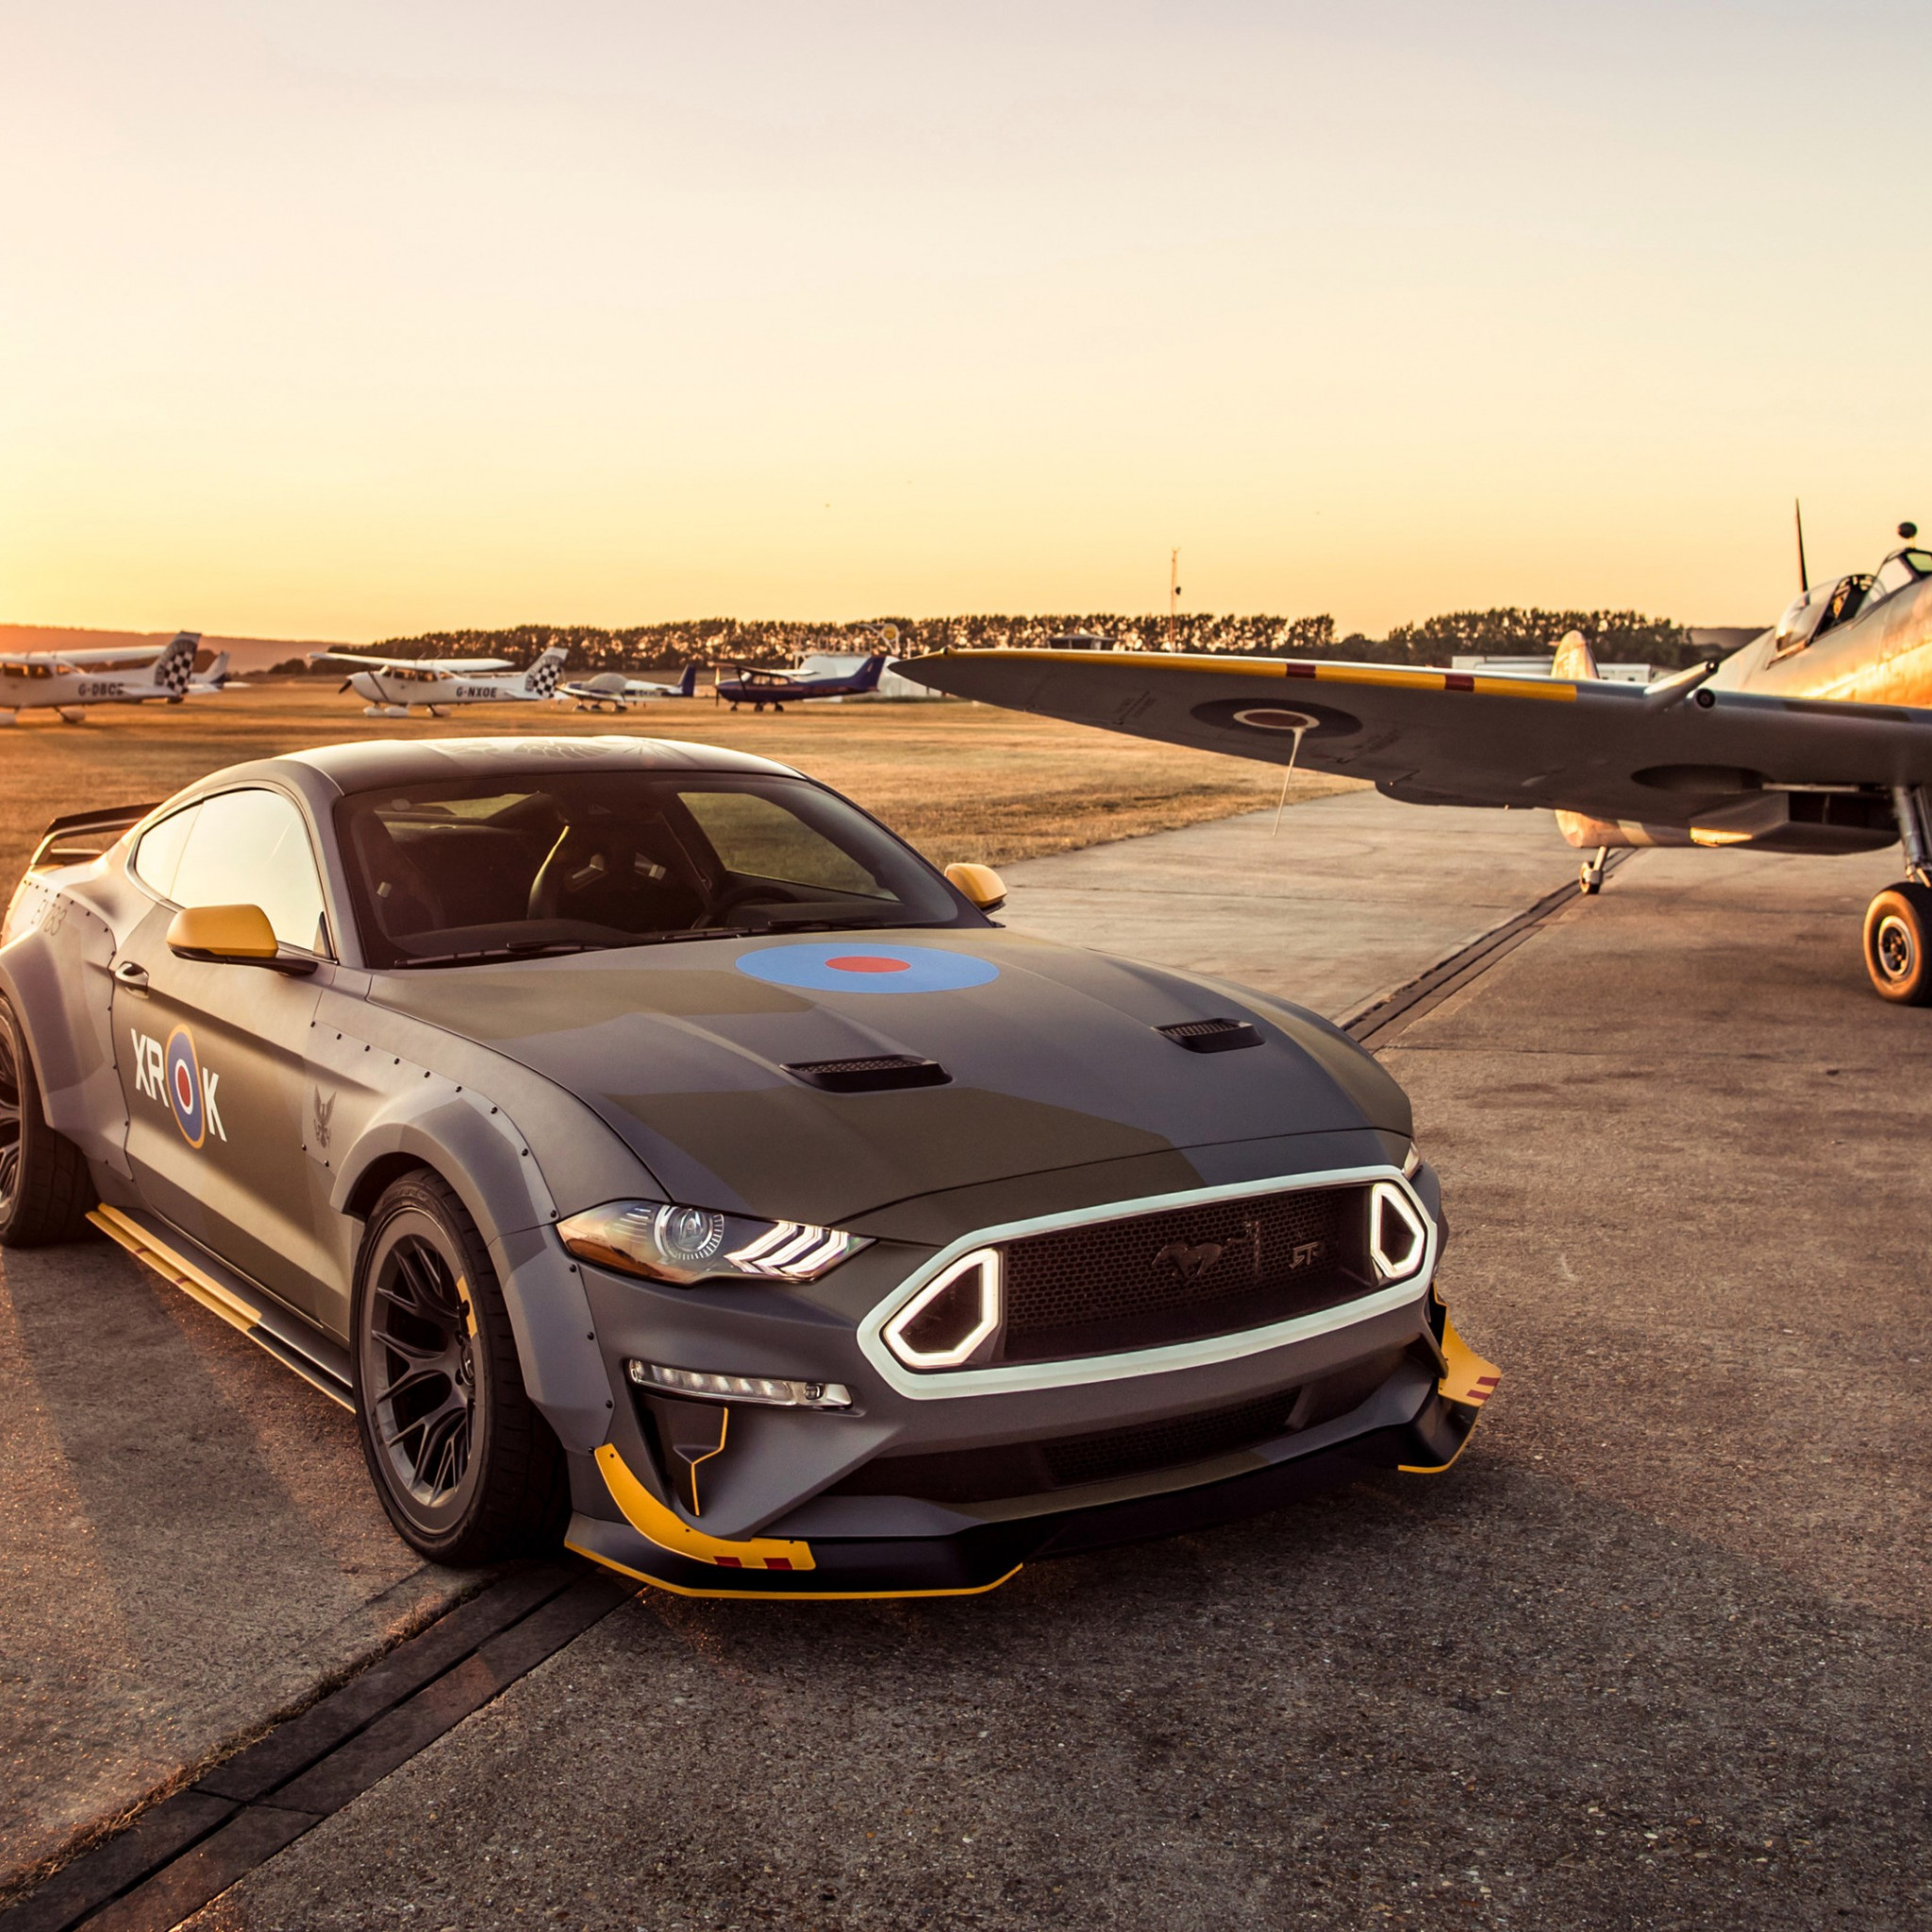 Ford Eagle Squadron Mustang Gt Wallpaper - Ford Eagle Squadron Mustang Gt - HD Wallpaper 